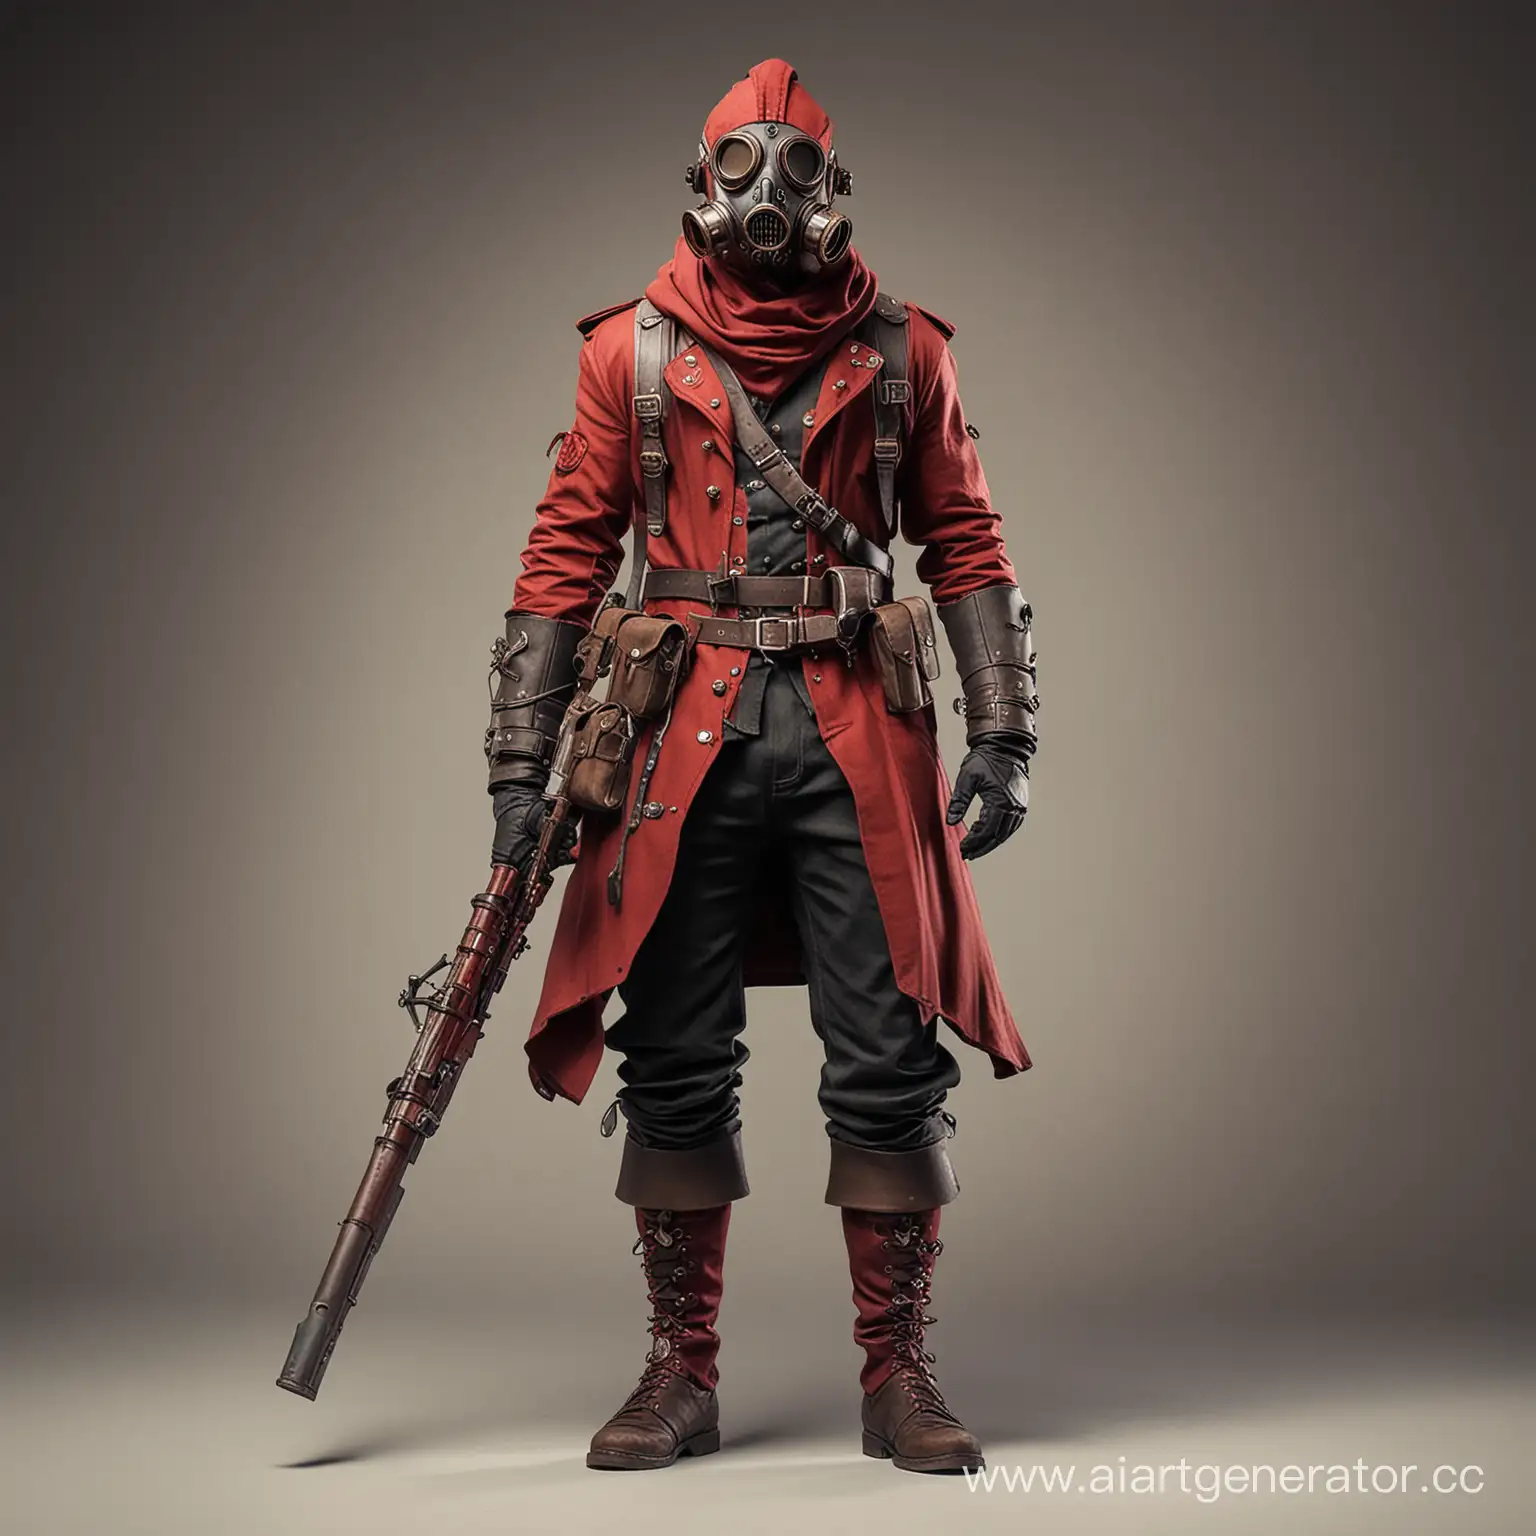 Steampunk-Warrior-with-WW2-Weapon-and-Gas-Mask-in-Red